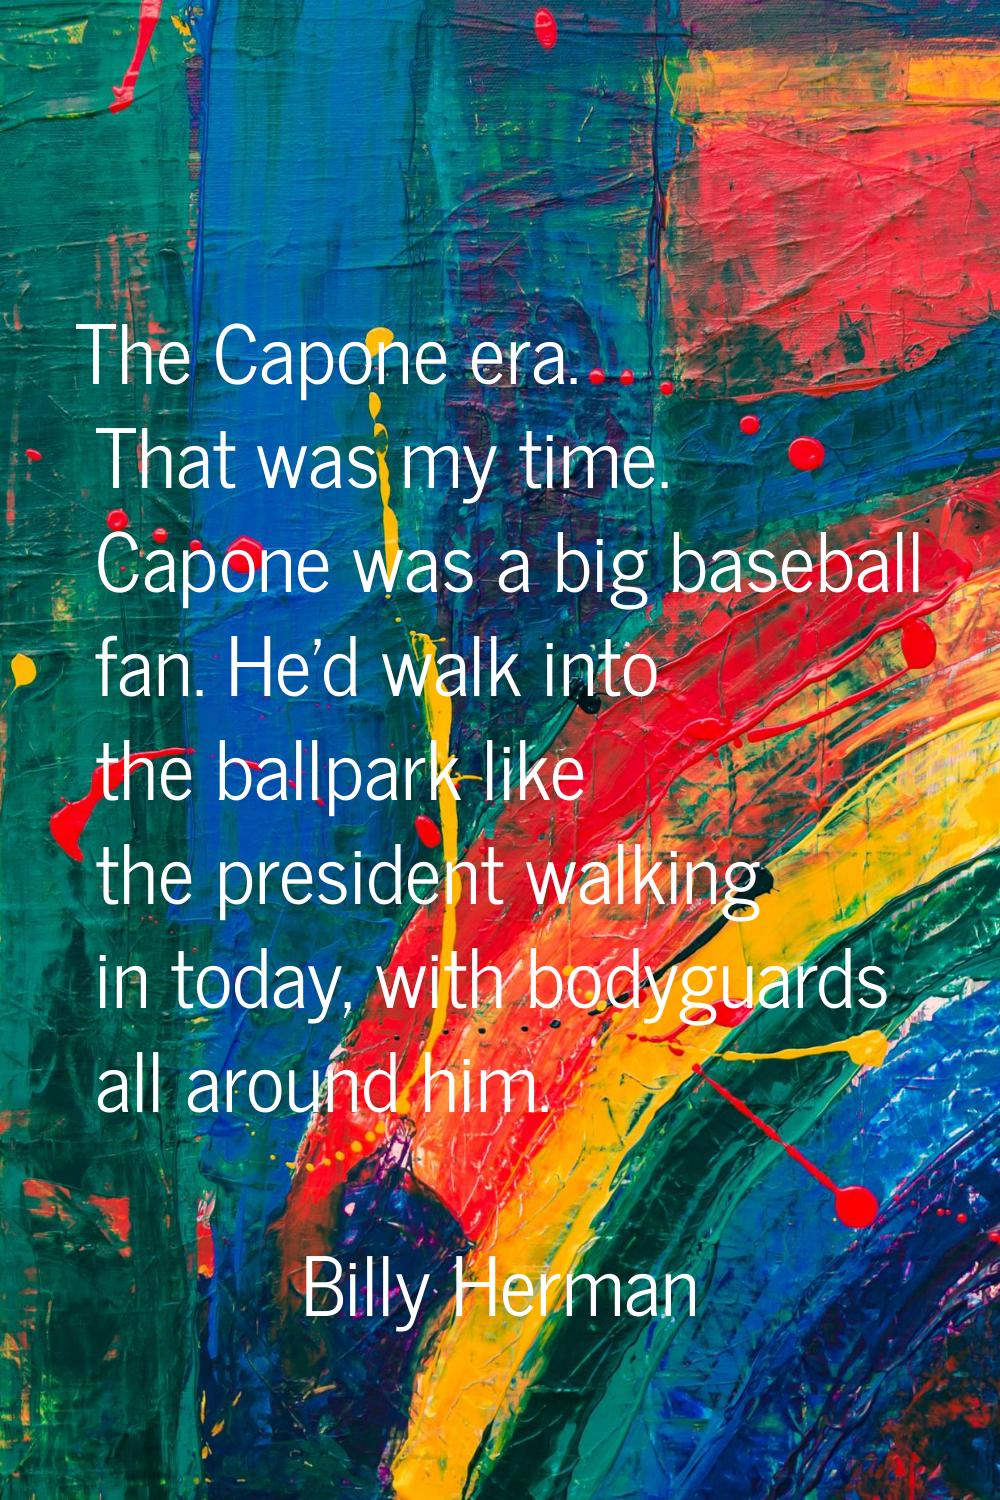 The Capone era. That was my time. Capone was a big baseball fan. He'd walk into the ballpark like t